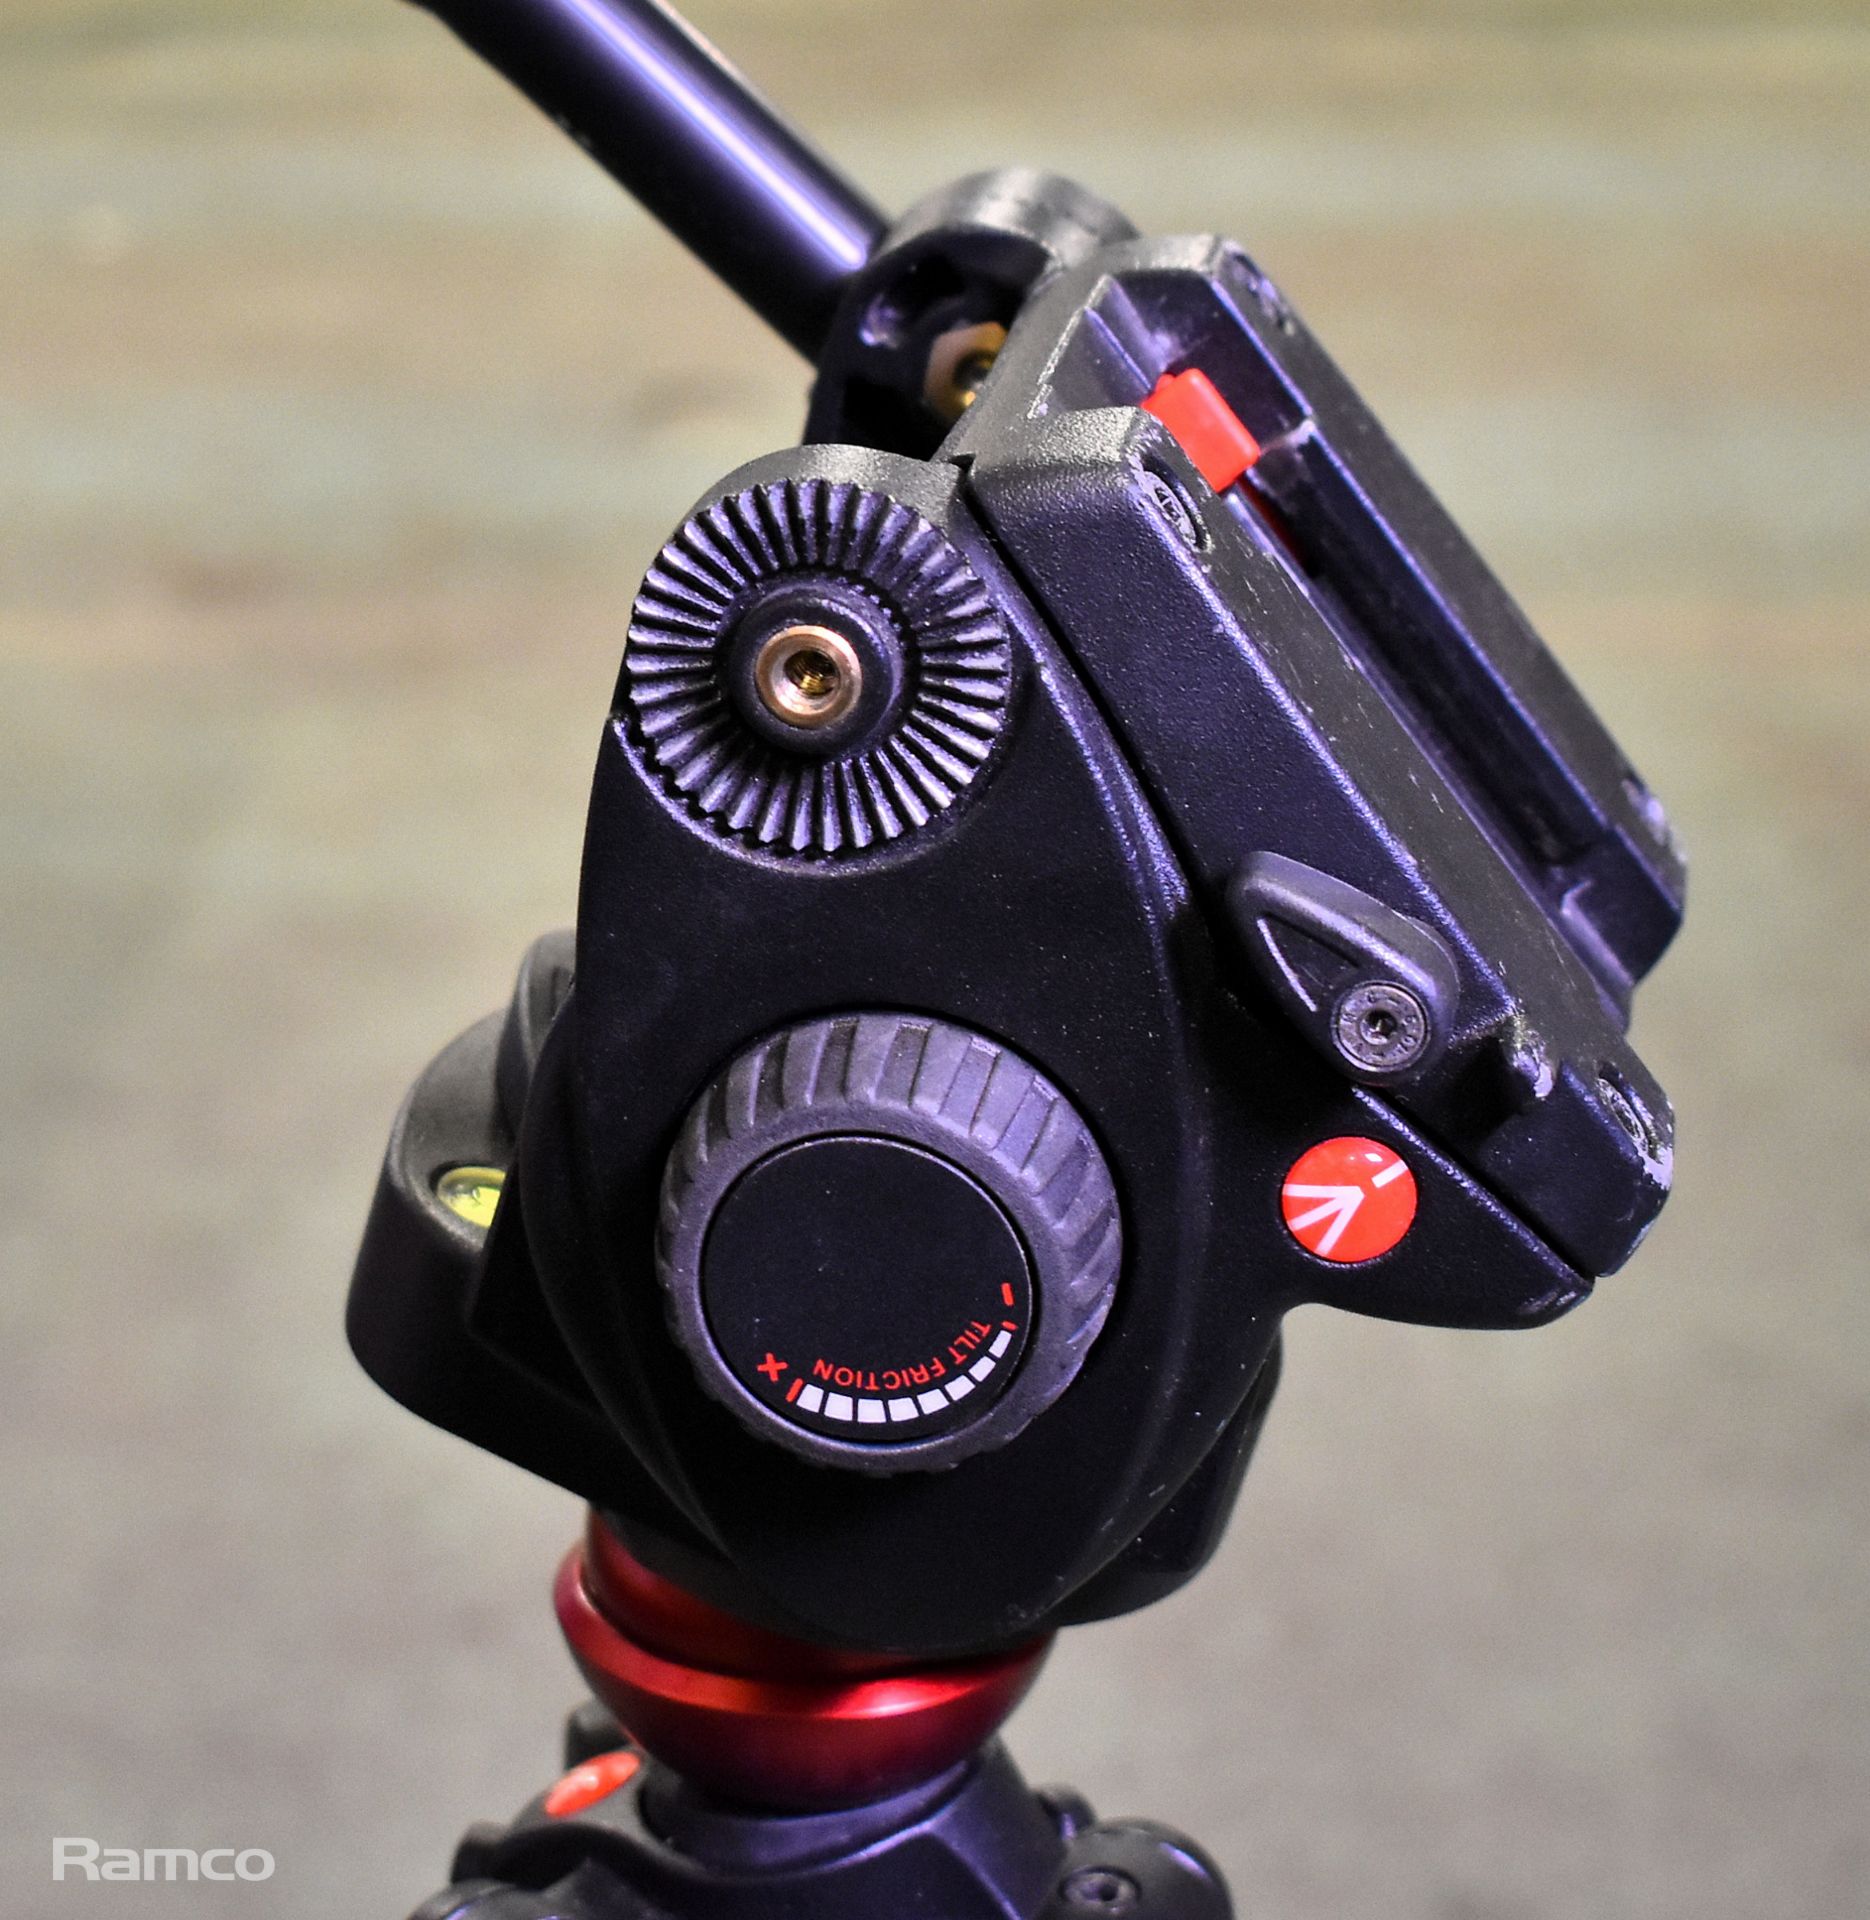 Manfrotto 501HDV head unit on a 745XB tripod with carry case - Image 7 of 8